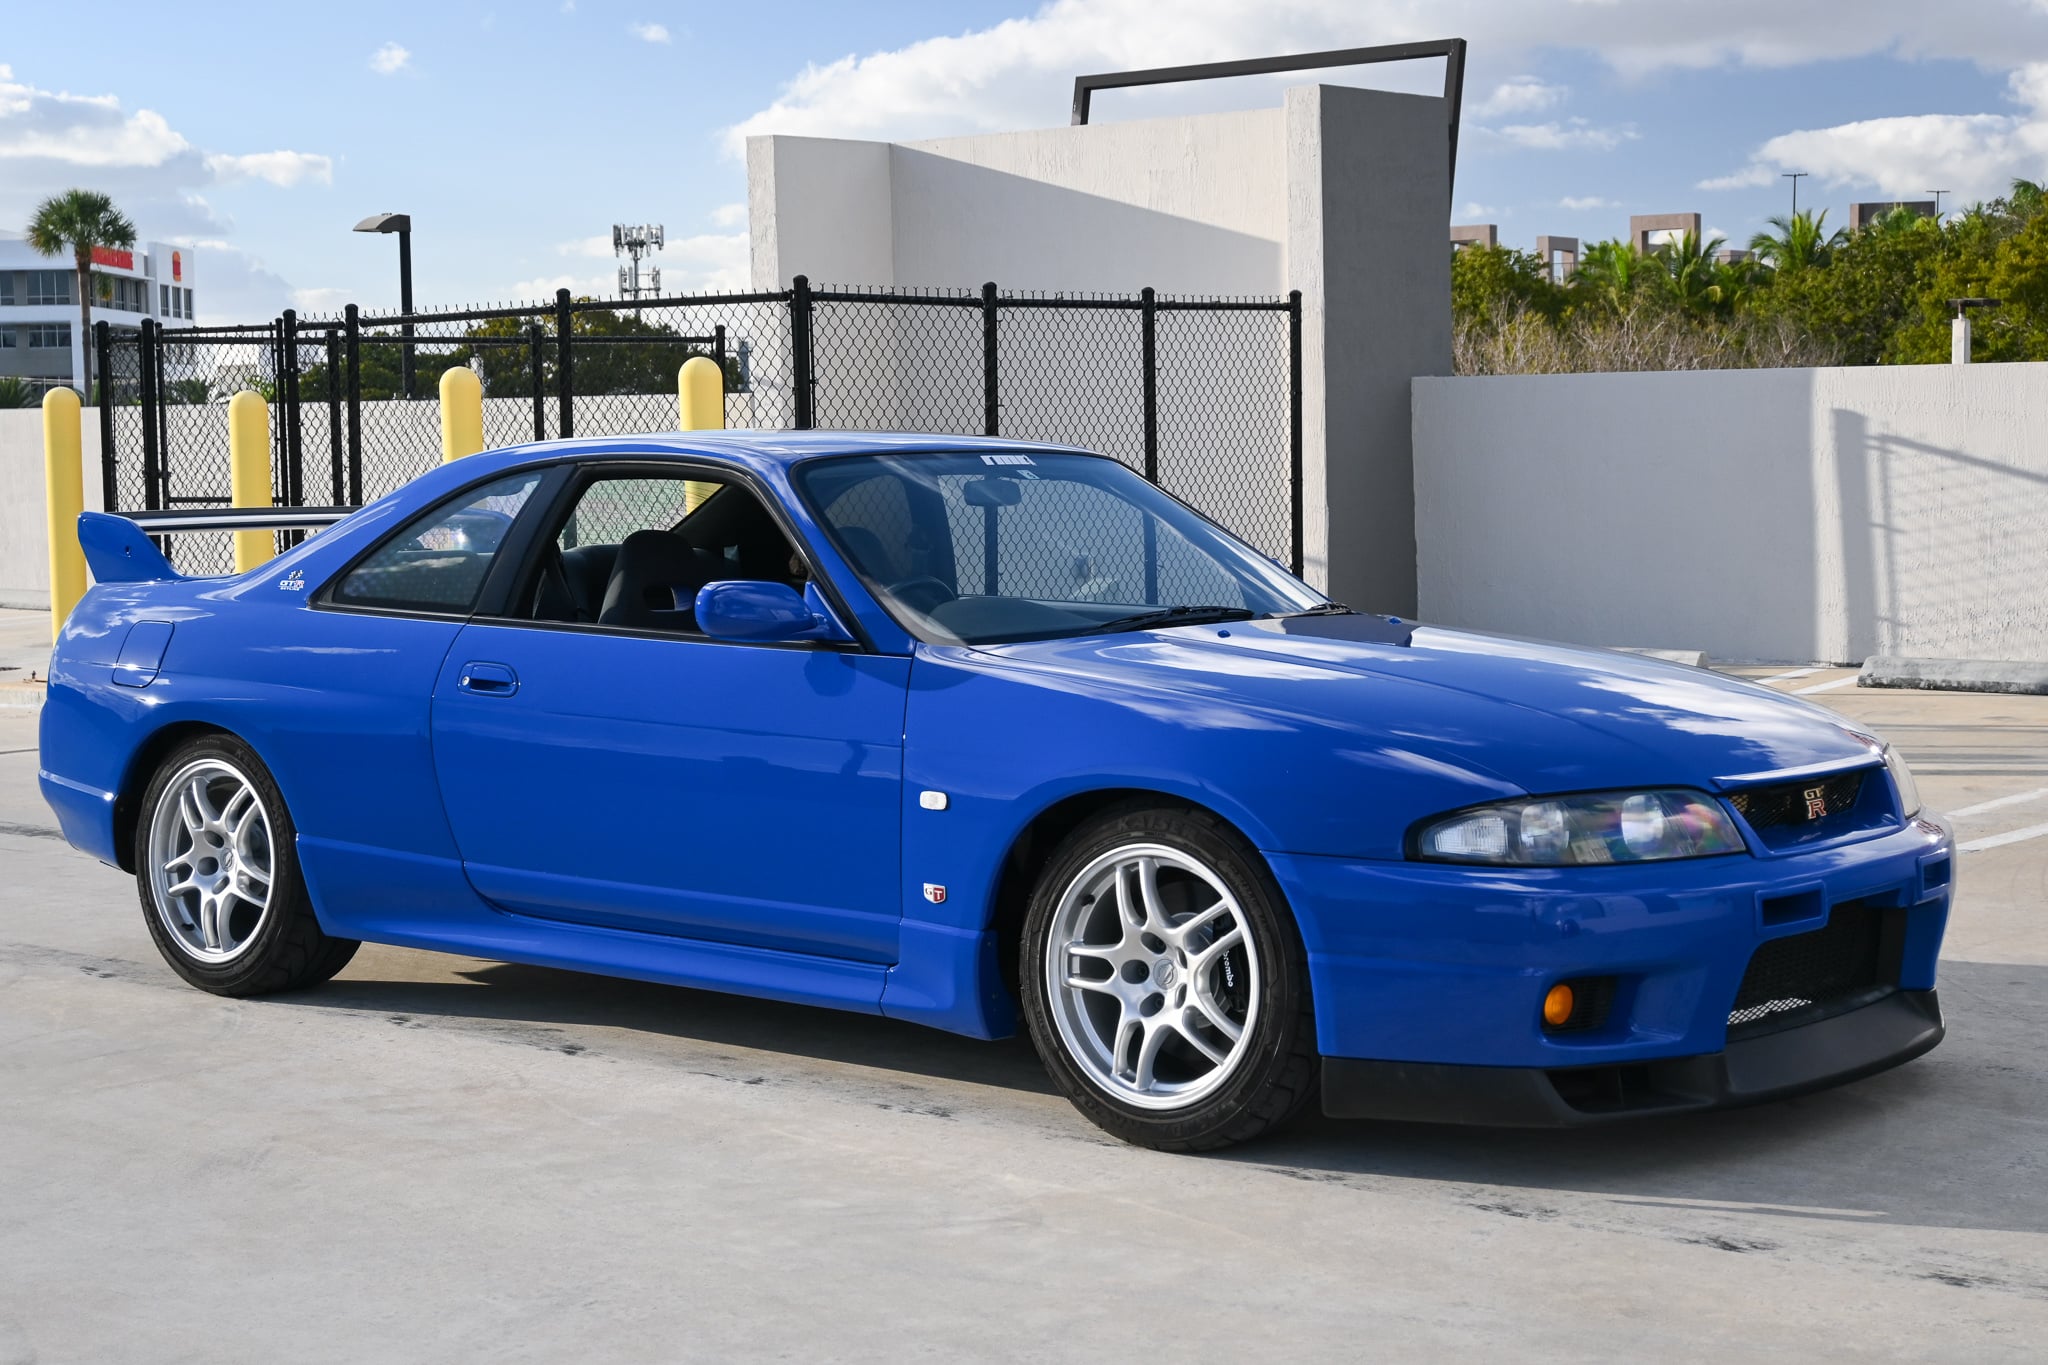 1996 Nissan GT-R R33 LM Limited | 1 of 188 LM Limited | Rare BT2 Championship Blue | Lightly Tuned | HKS